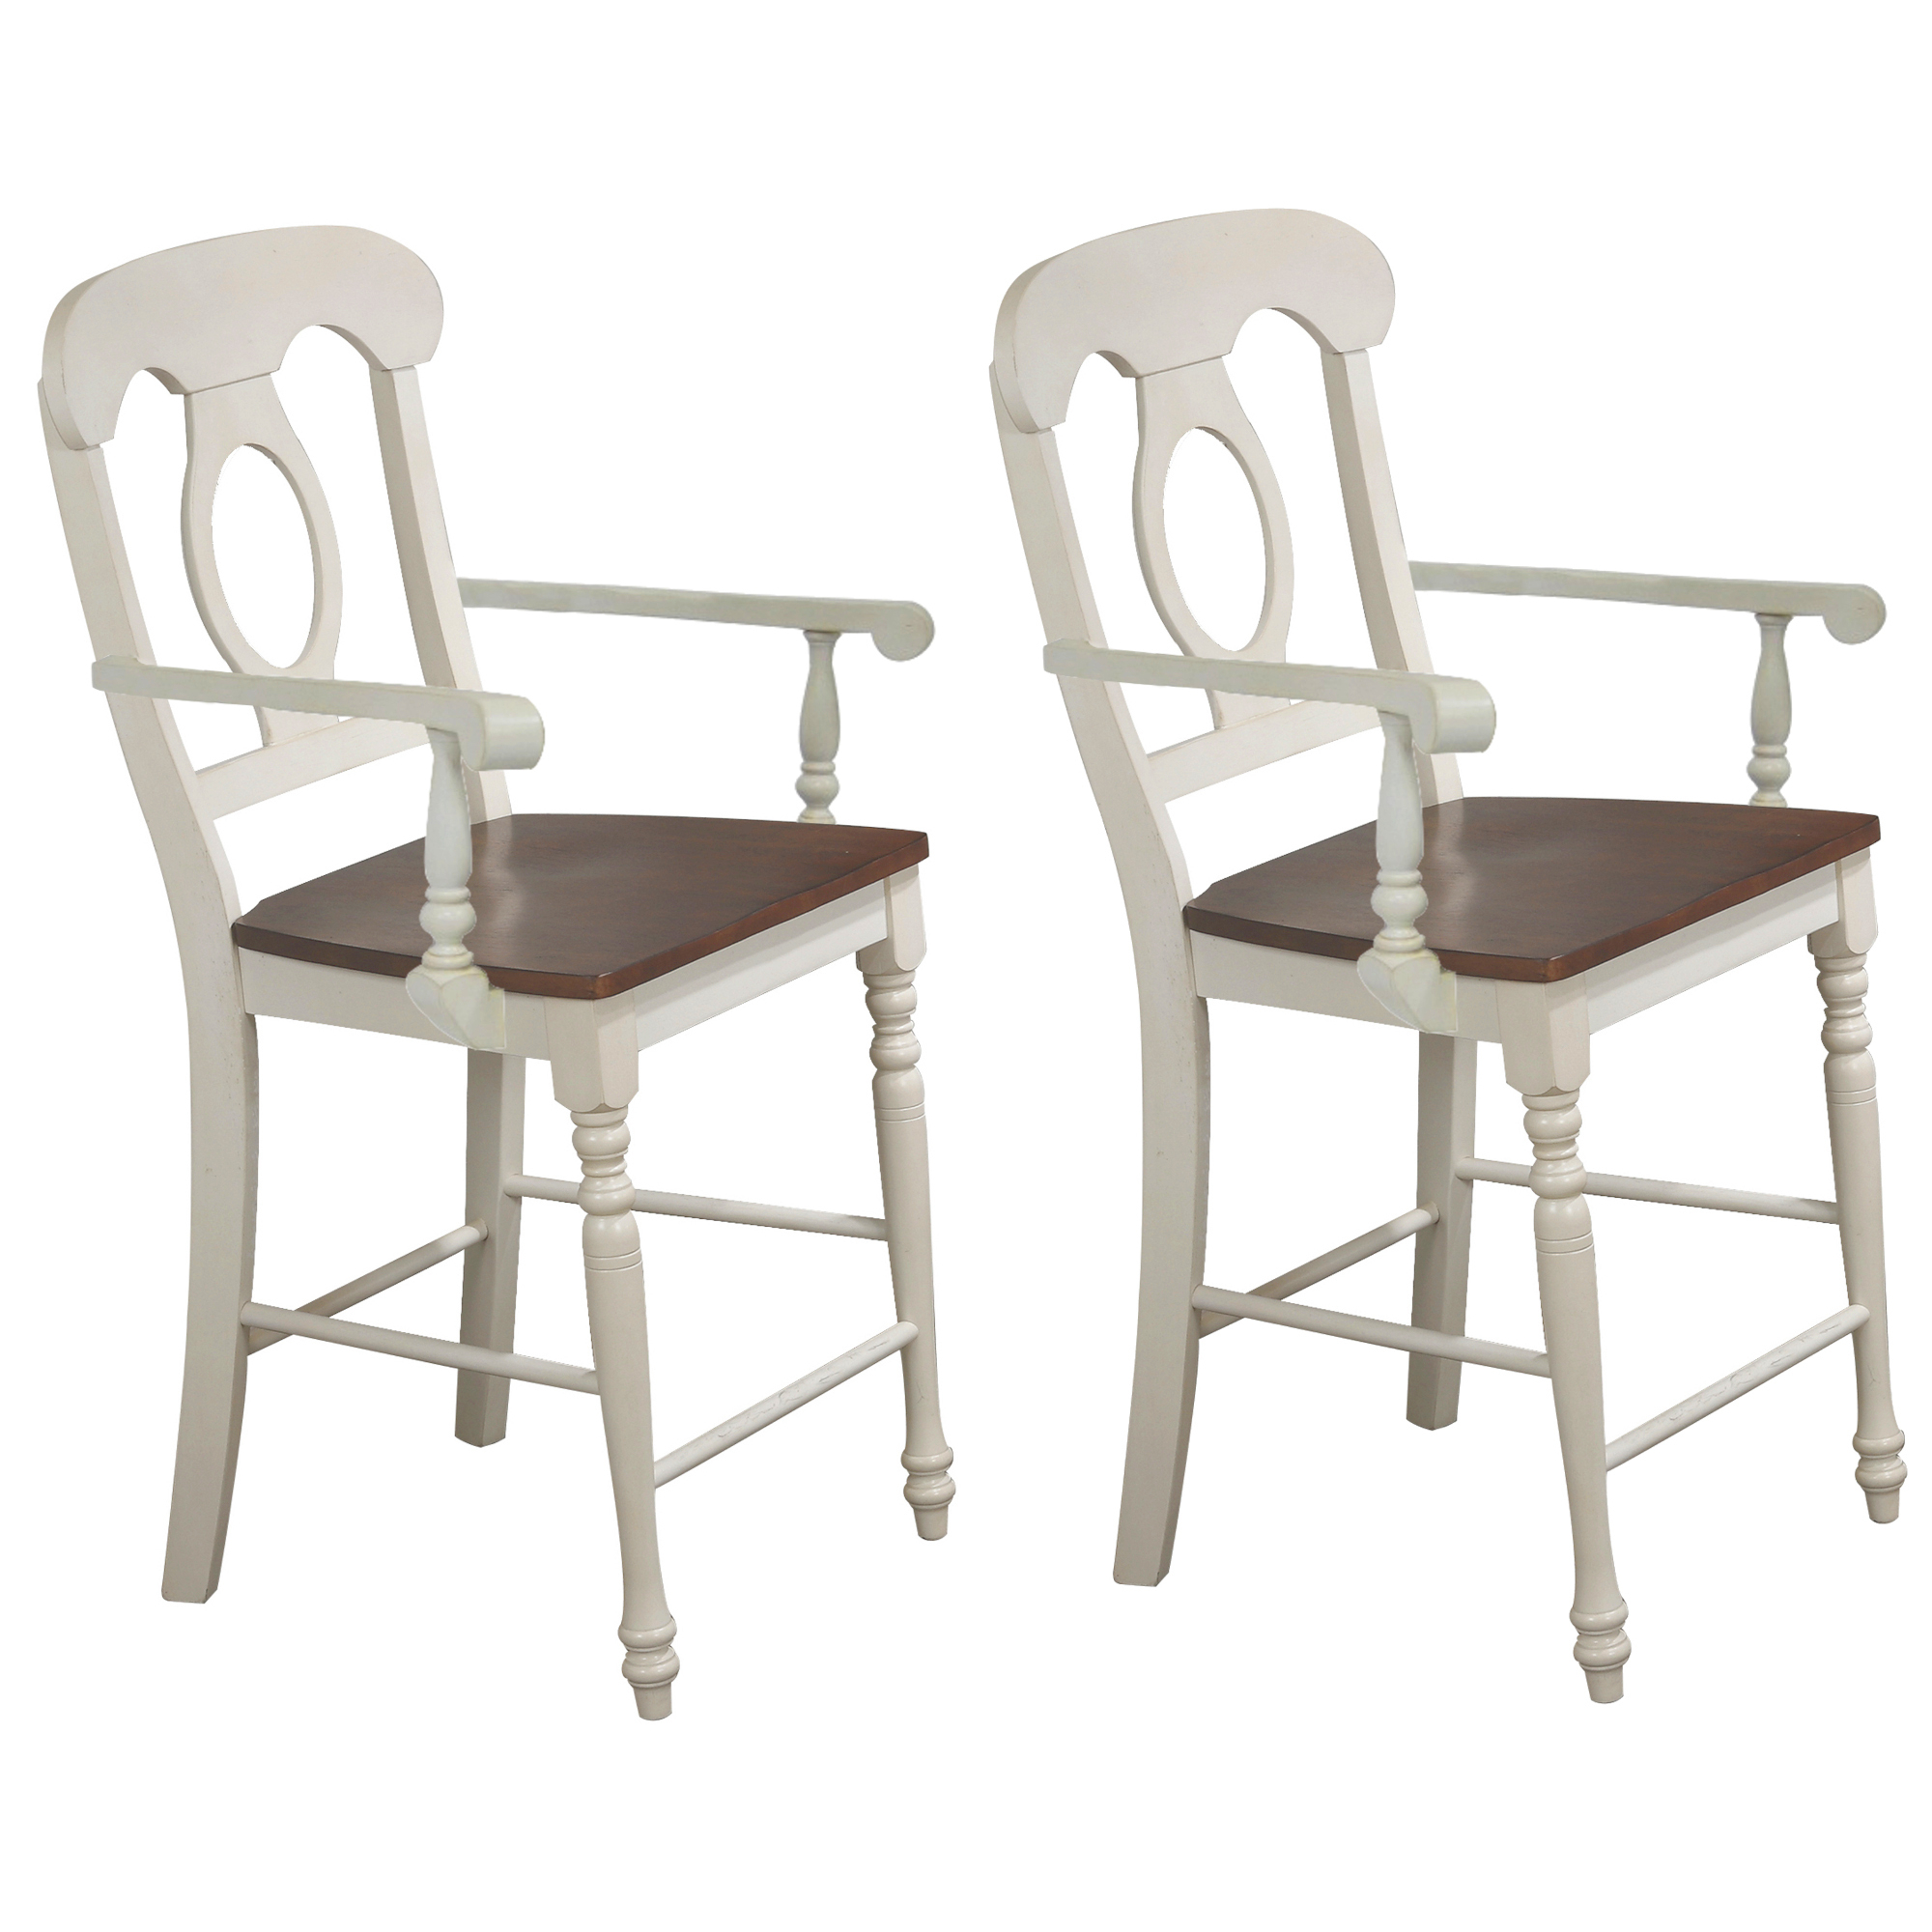 Andrews Bravo 42.5 in. High Back 24 in. Bar Stool with Solid Wood Seat (Set of 2) - Distressed Antique White and Chestnut Brown